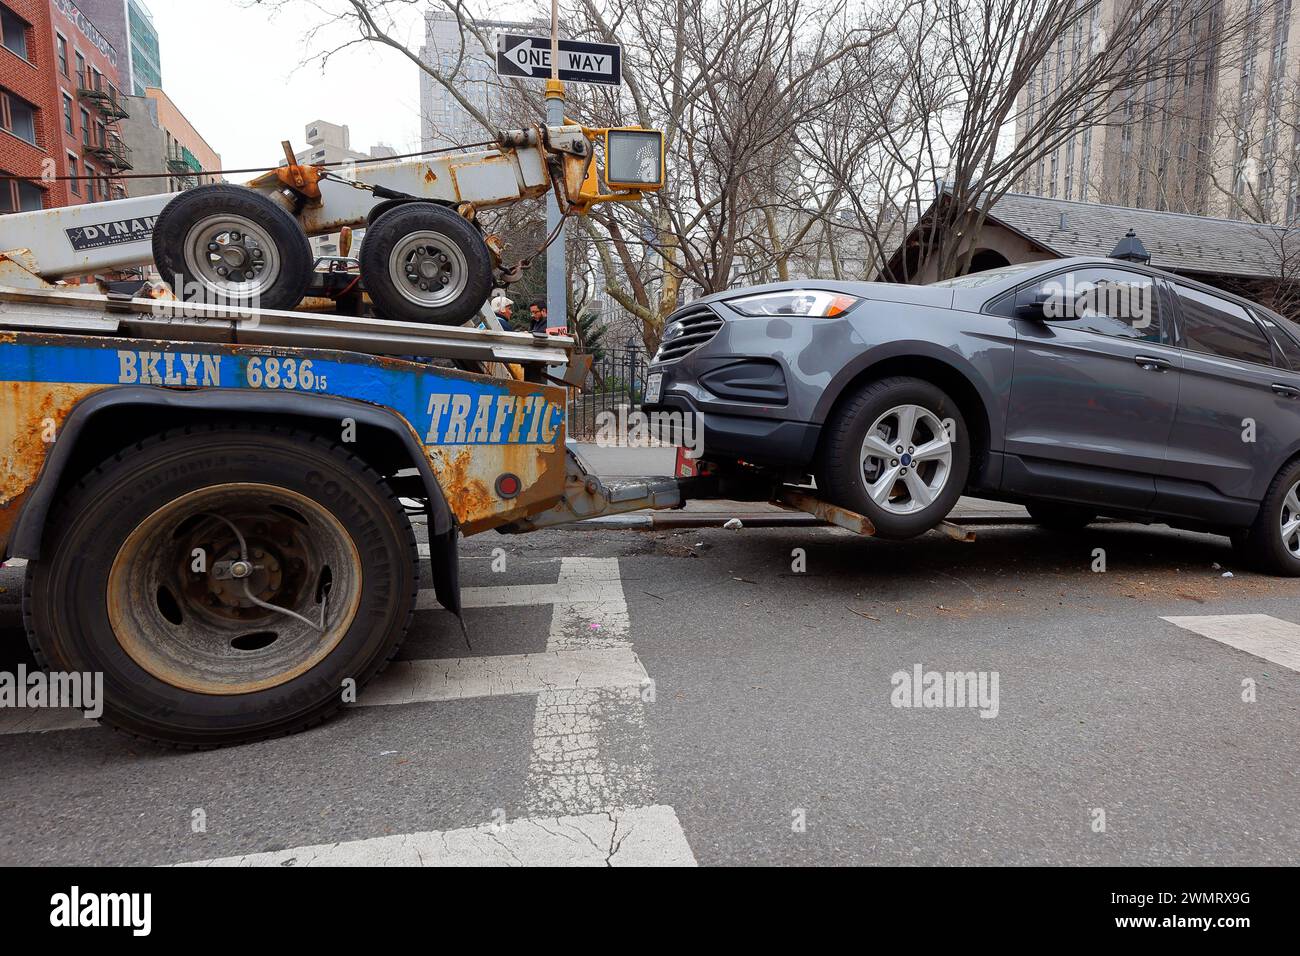 A NYPD Traffic wheel lift tow truck towing a car in Manhattan, New York City Stock Photo